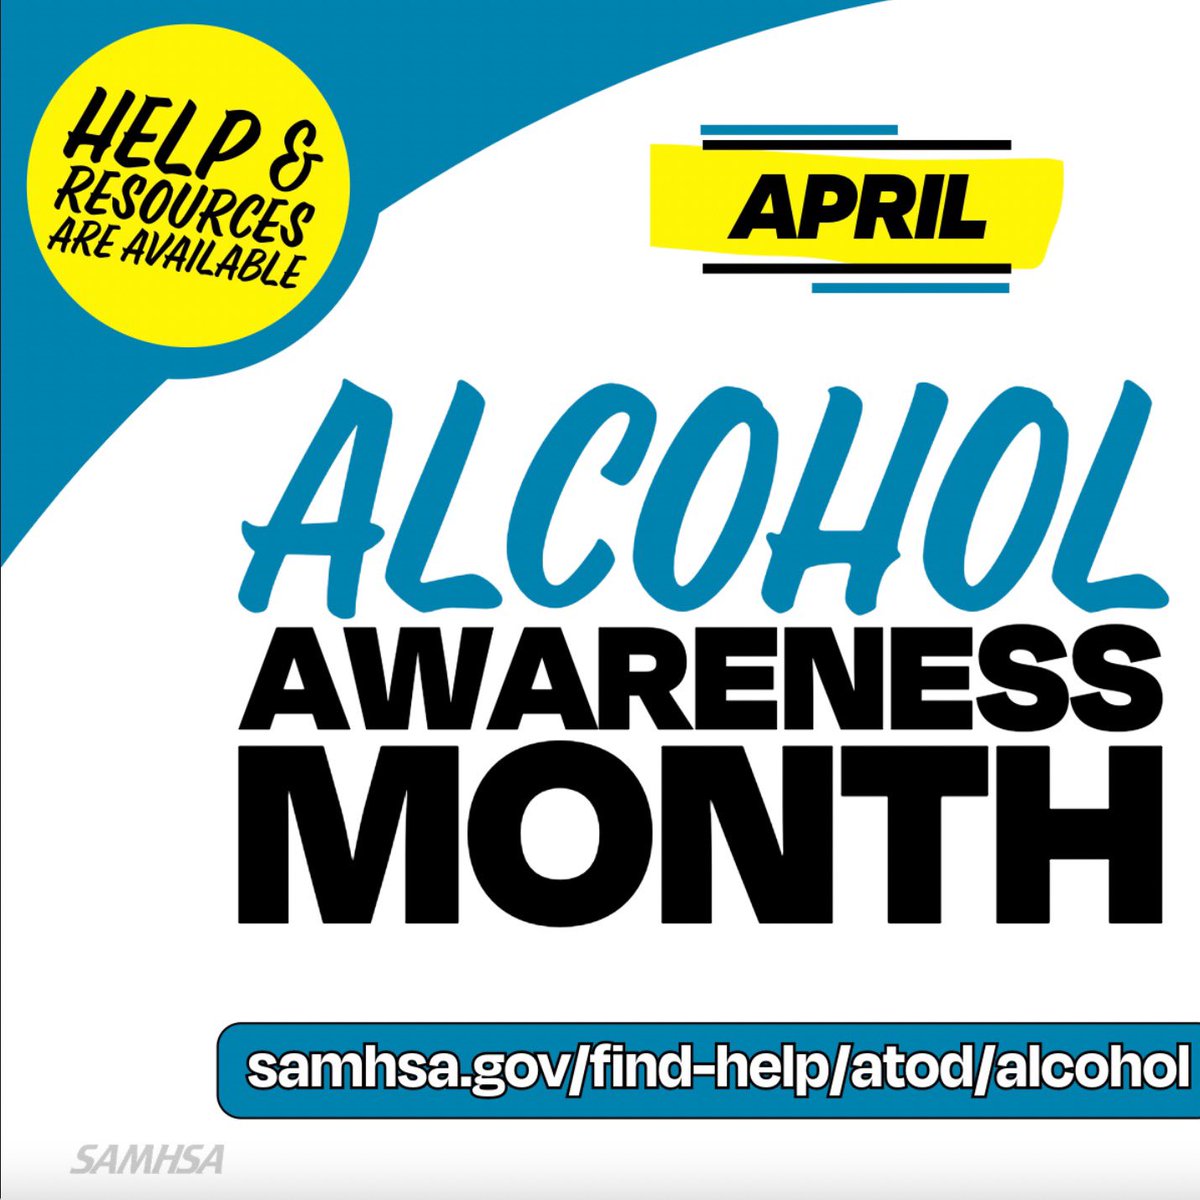 April is #AlcoholAwarenessMonth—a time to raise awareness of alcohol use & misuse. Find helpful resources on alcohol use & misuse prevention, treatment & recovery support services that you & your community can use to support those who may be struggling: samhsa.gov/find-help/atod…